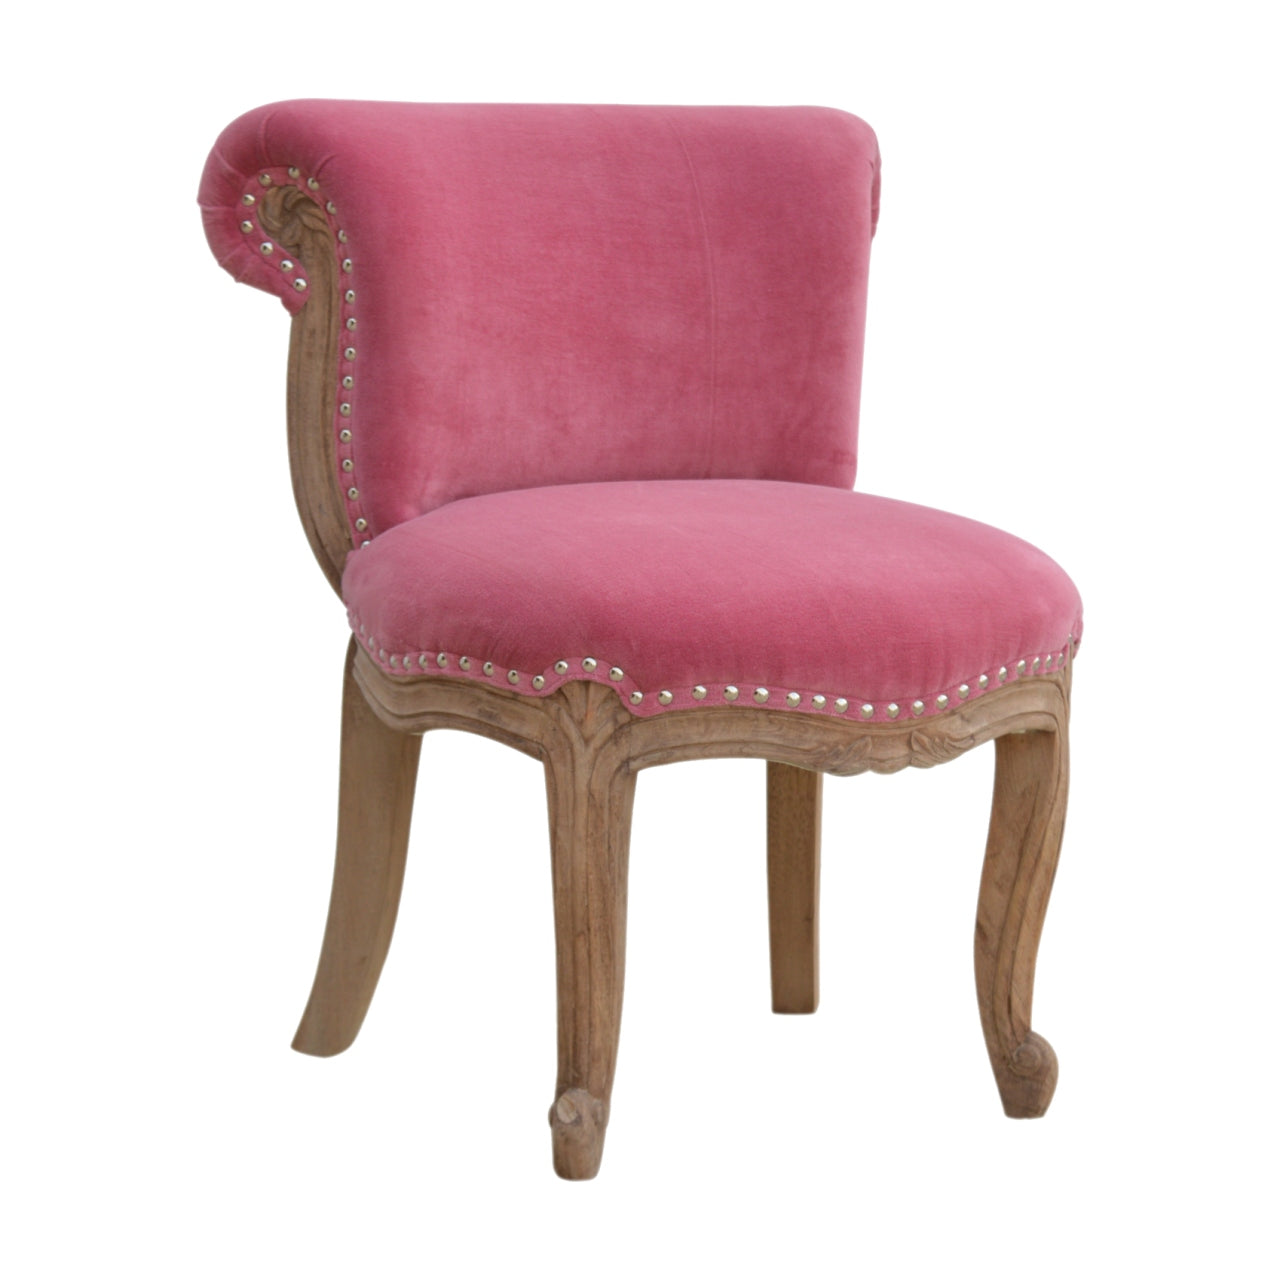 View Pink Velvet Studded Chair information